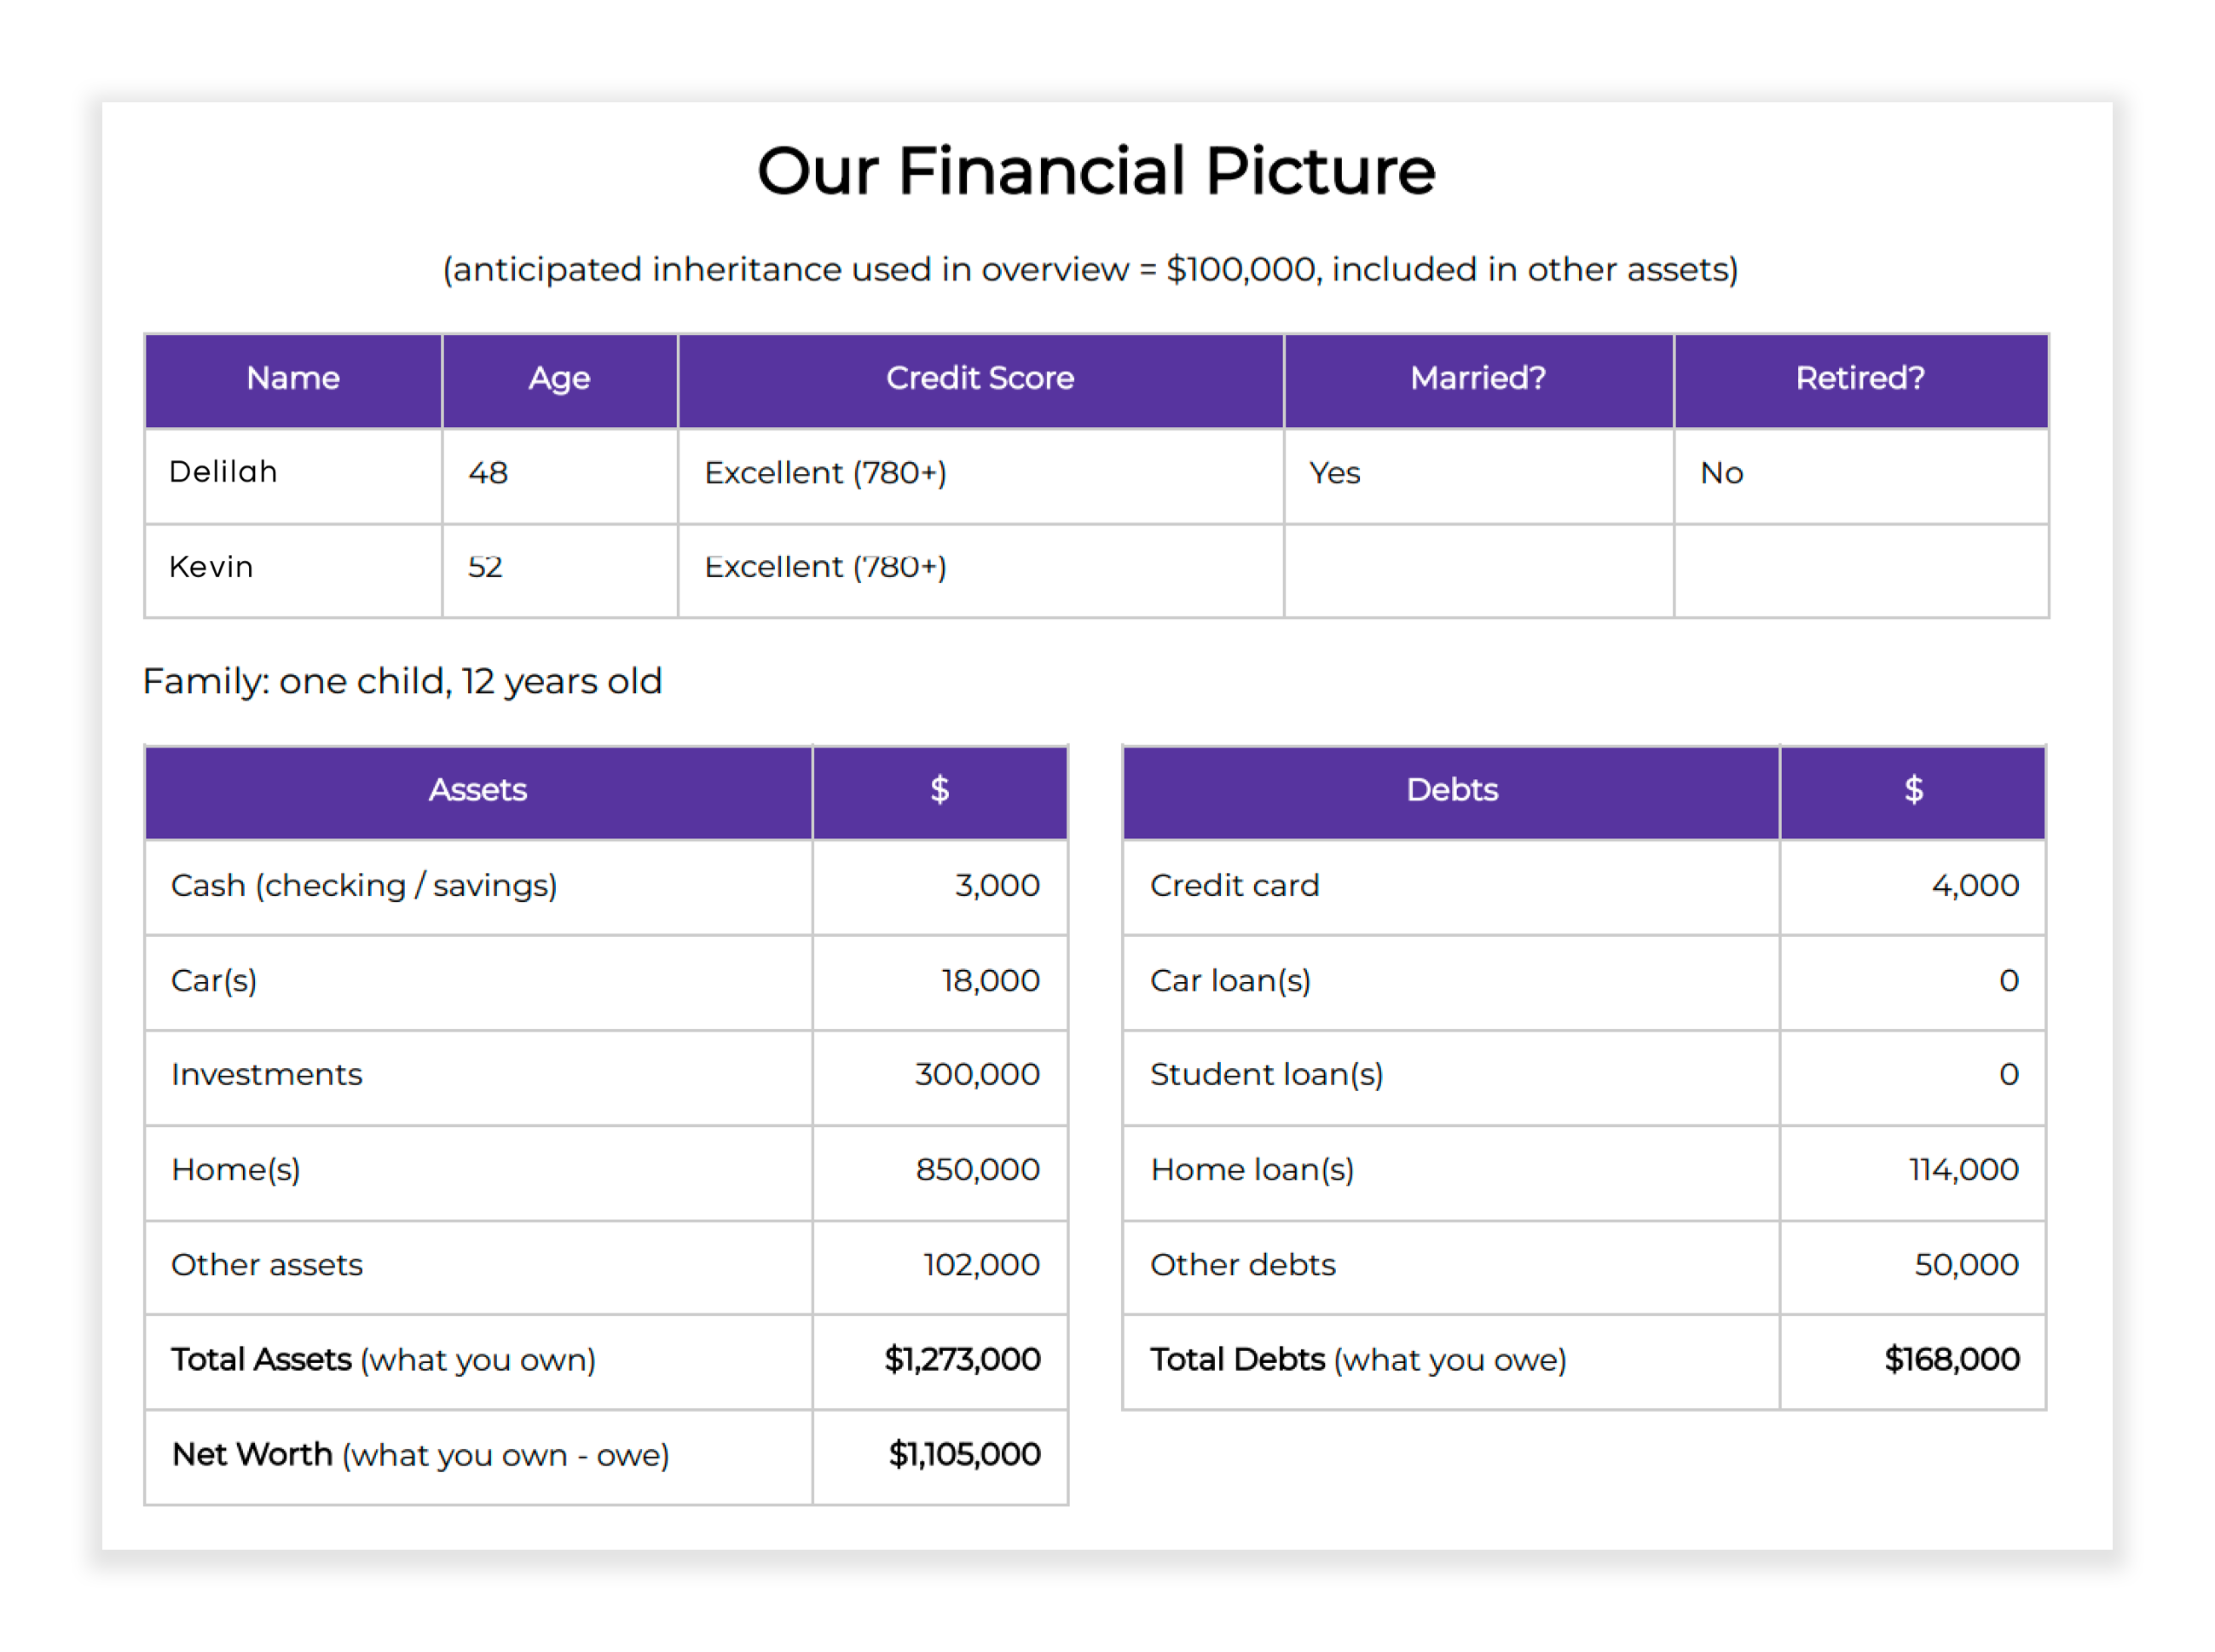 View financial plans inside Anasova to get an in-depth view of the lead including 50 neatly organized data points.